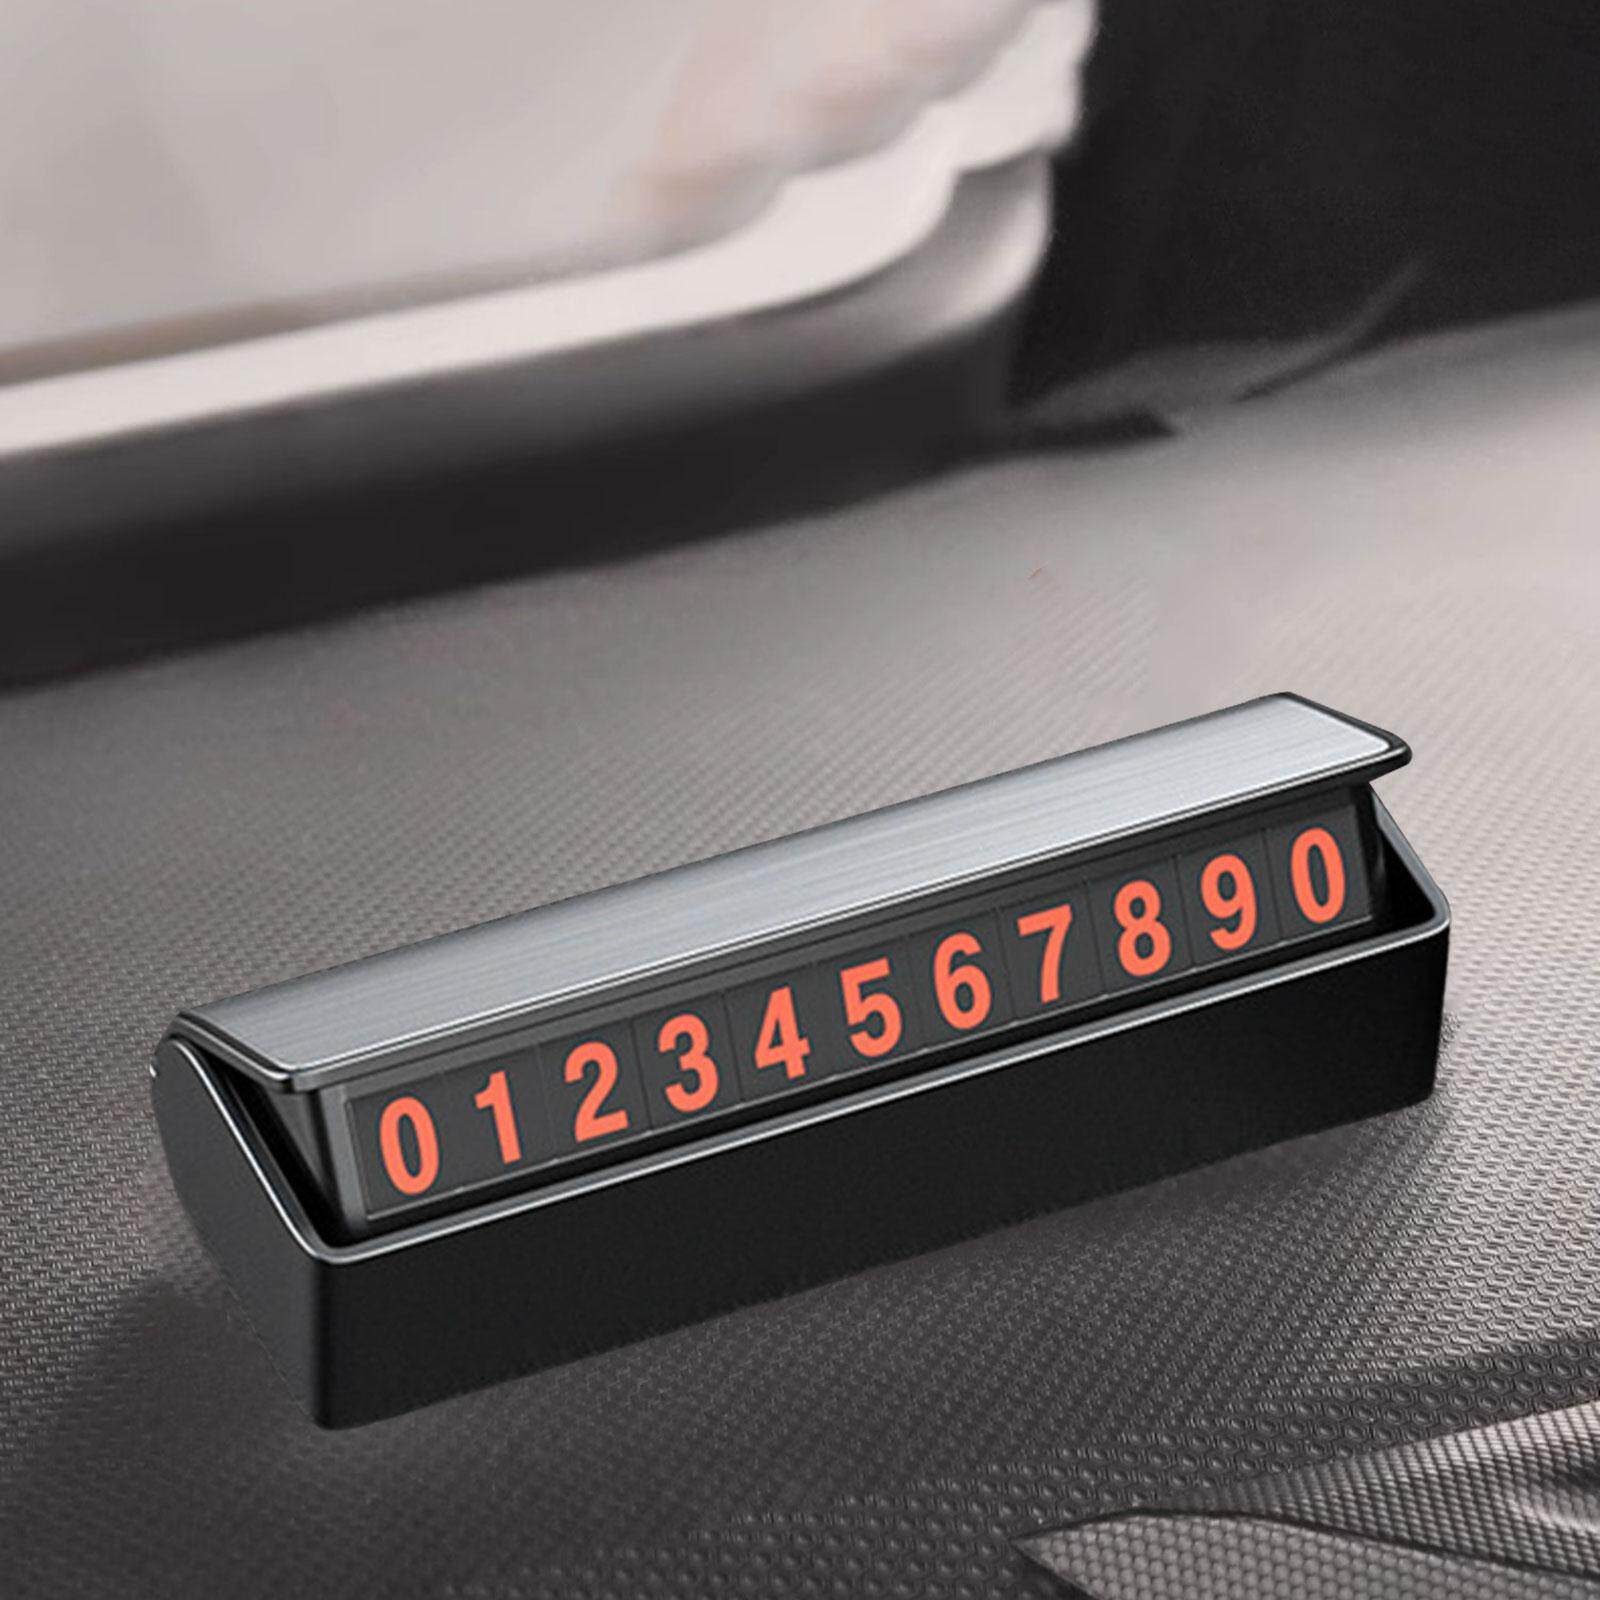 Car Phone Number Plate Lightweight Accessories Parking Numbers Card